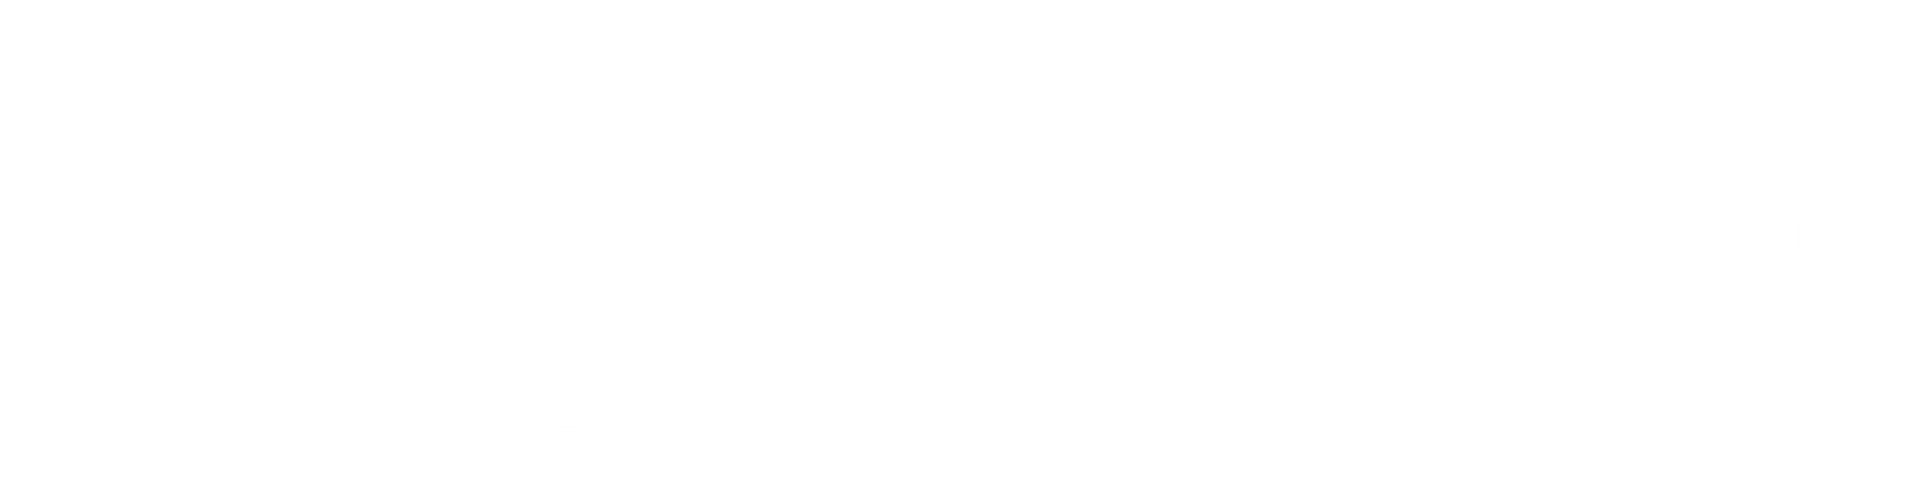 Advantage Point Student Apartments LOGO - header, go to homepage